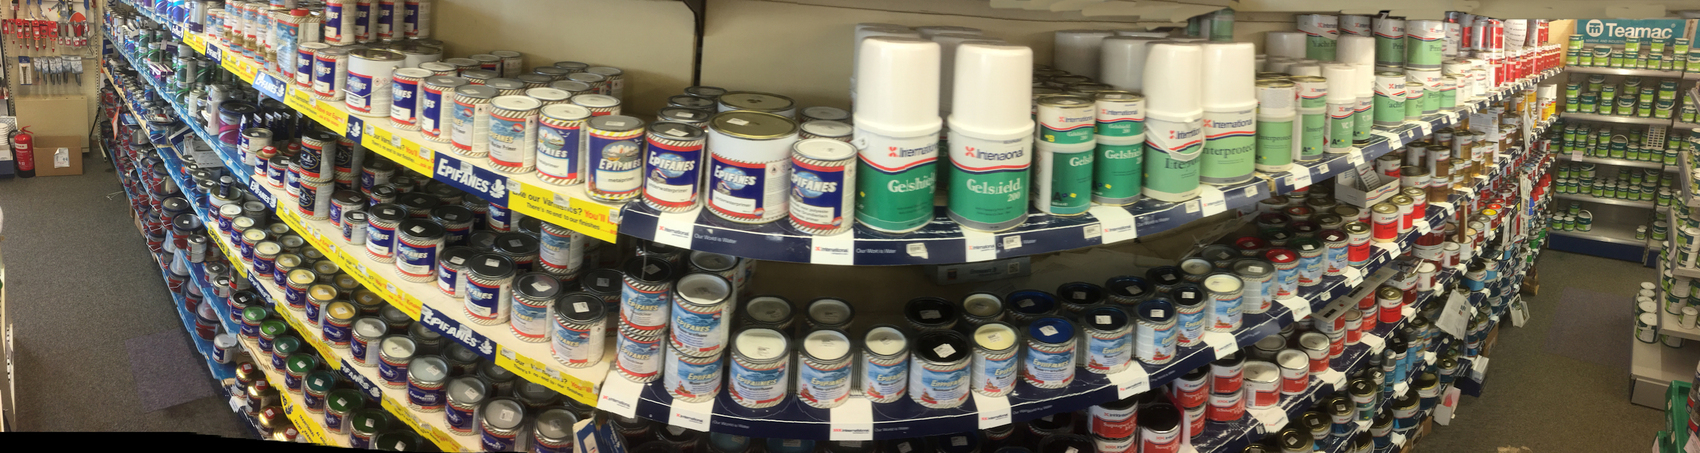 Marine Paints and Varnishes                                                                                                                                                                                                                     